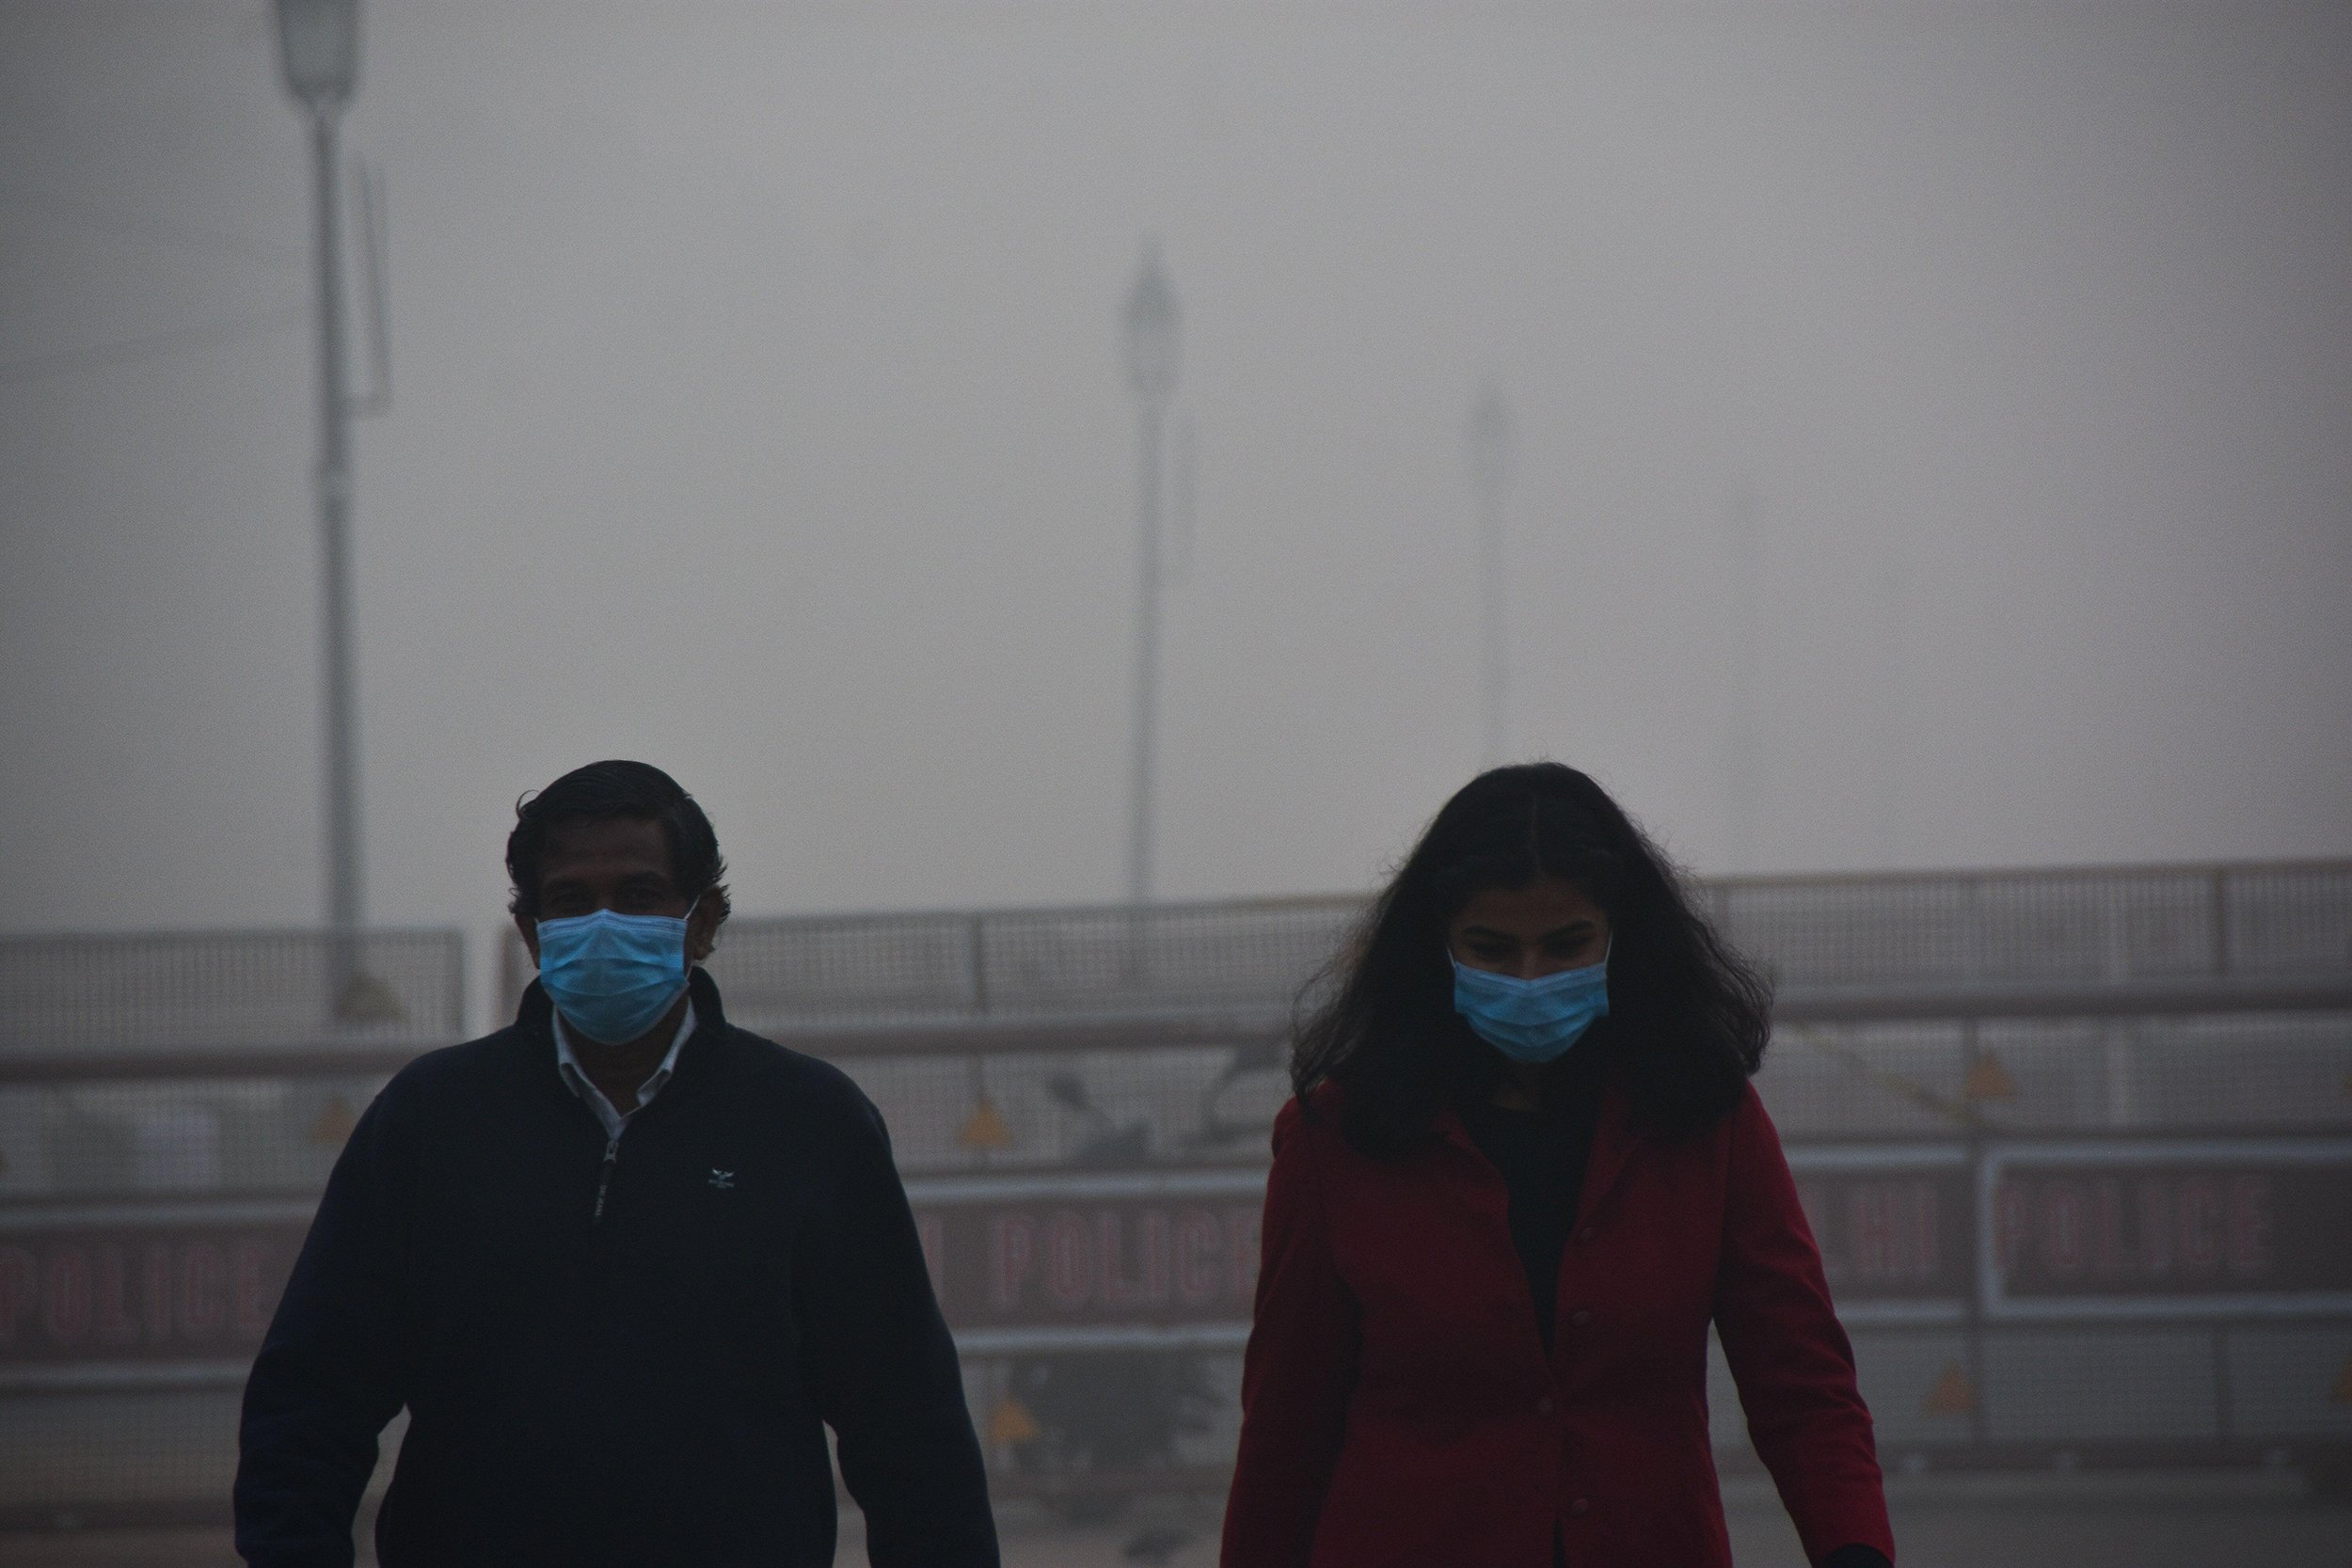 <p>Morning walkers masked against the Covid-19 virus and the smog near India Gate in New Delhi in November 2020 (Image: Manish Rajput/SOPA Images via ZUMA Wire/Alamy)</p>